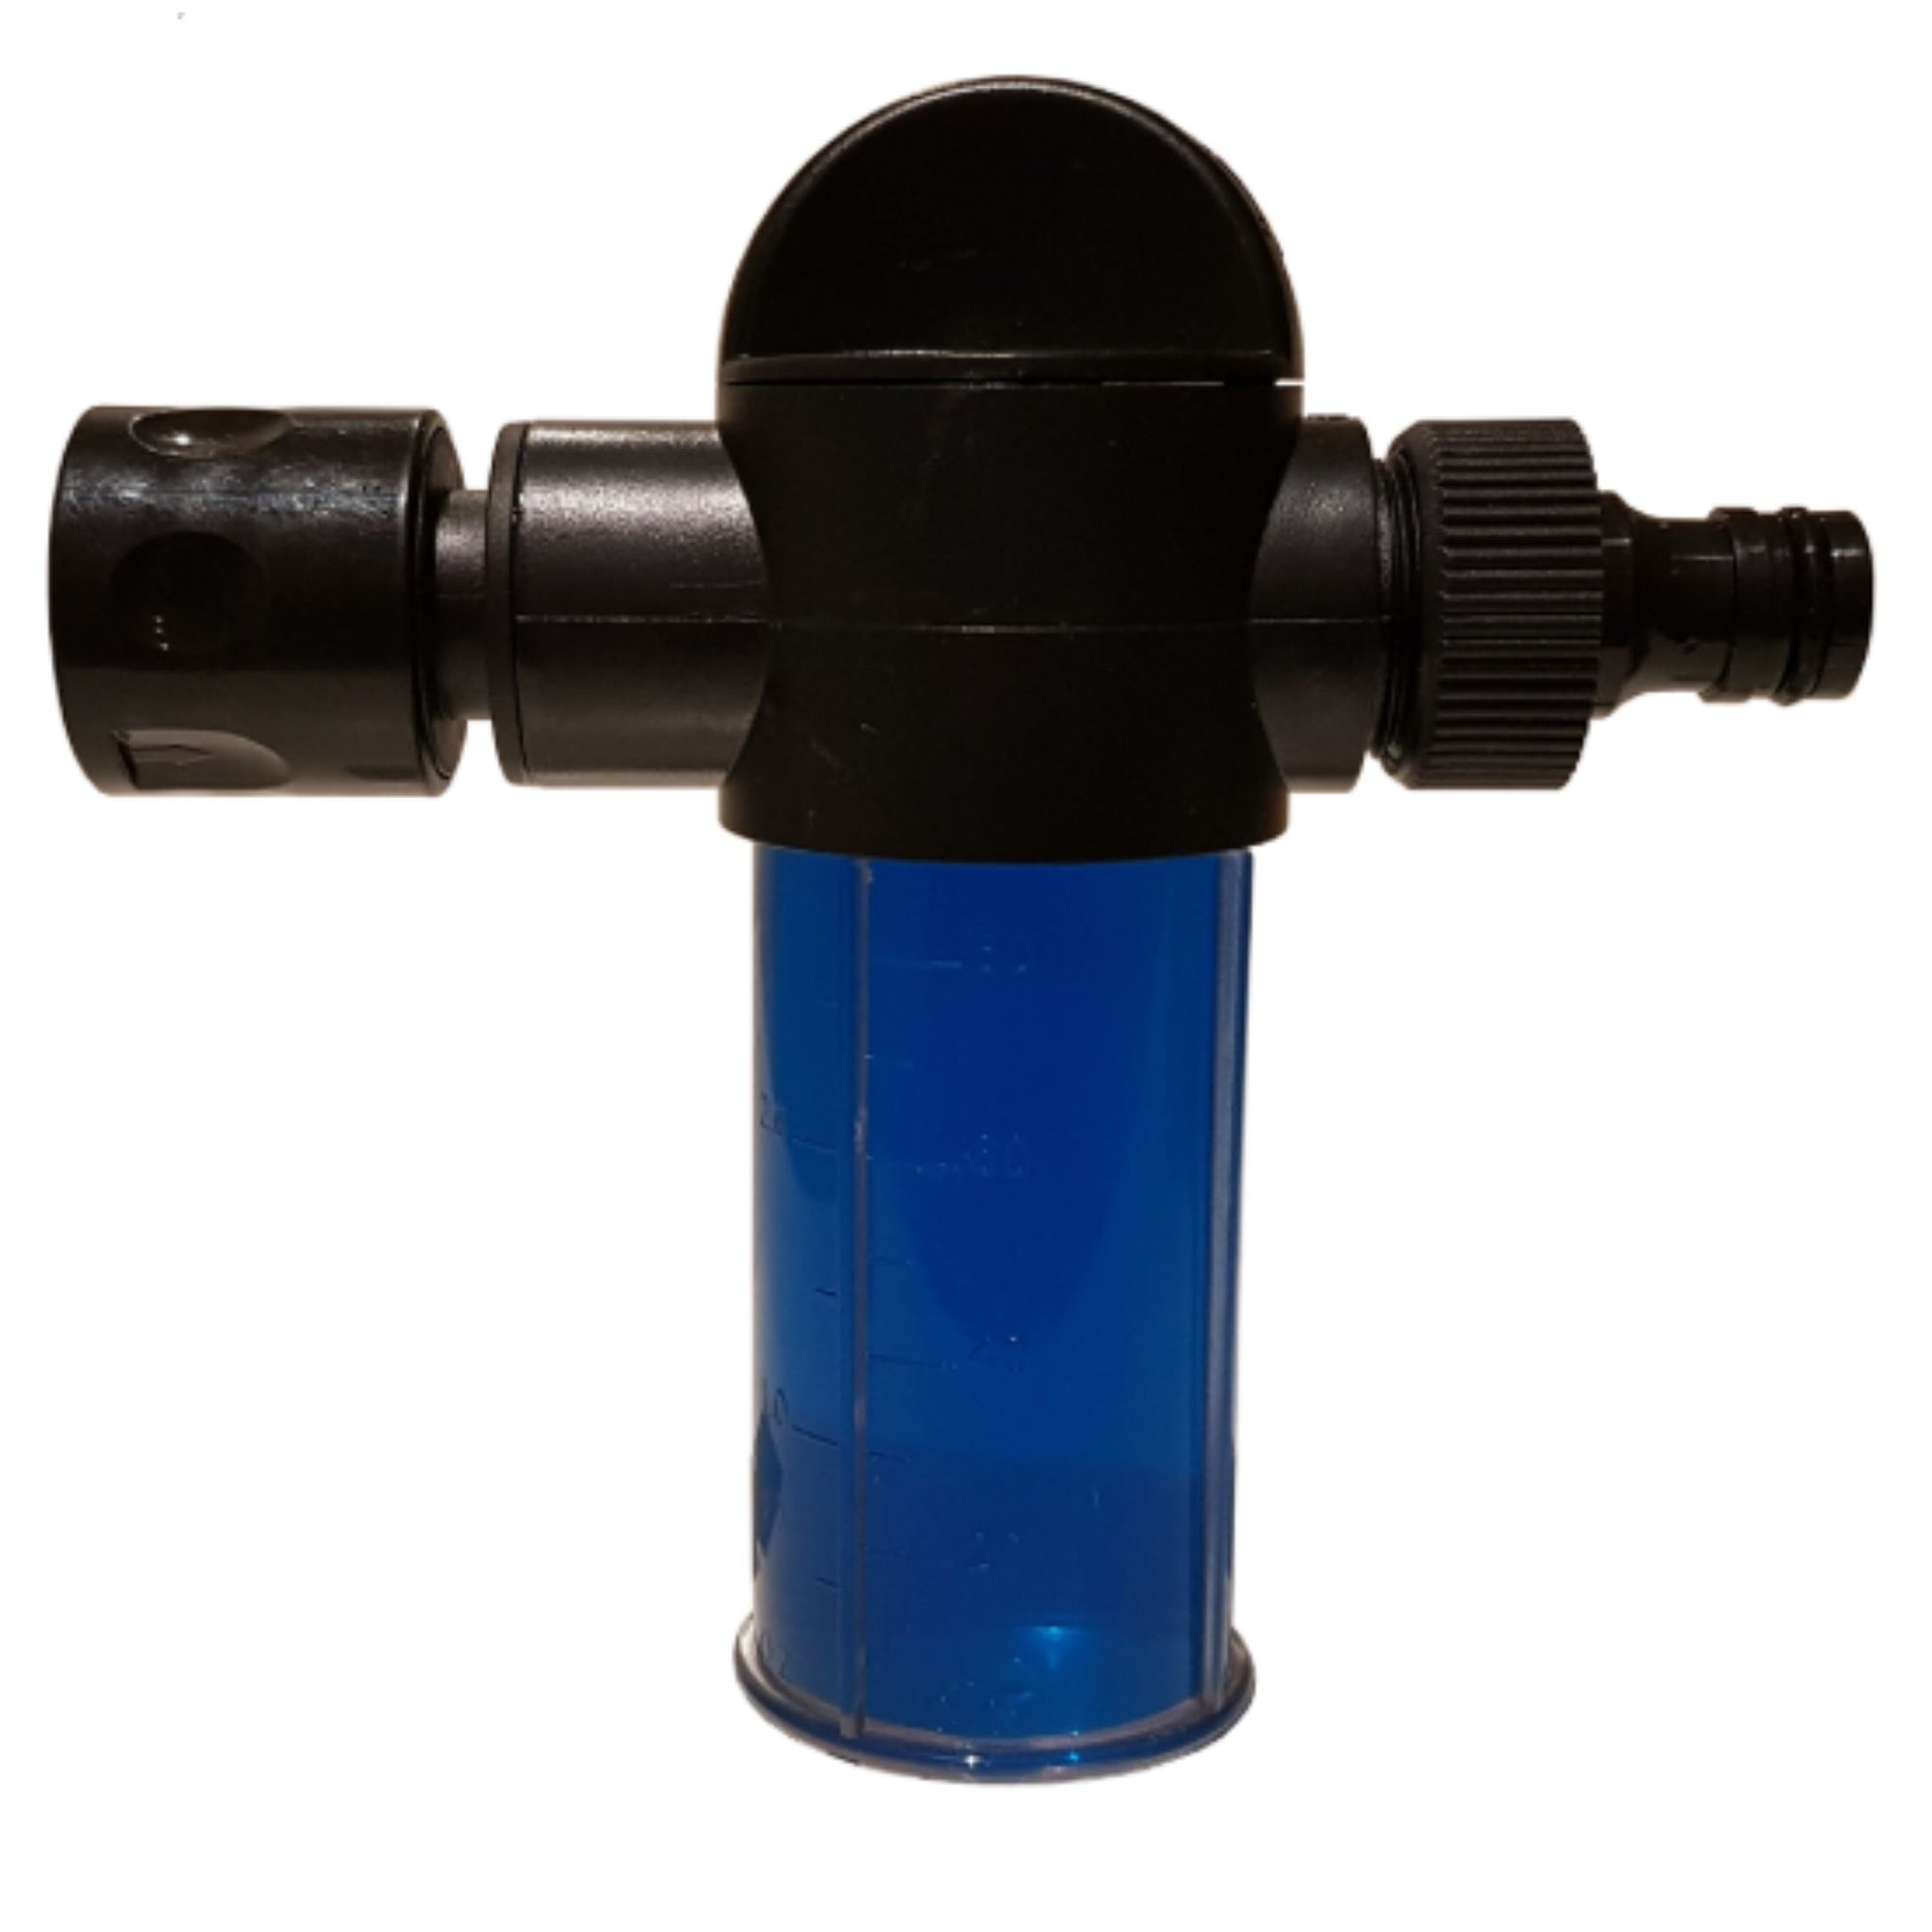 Black hose connector with clear shampoo container.